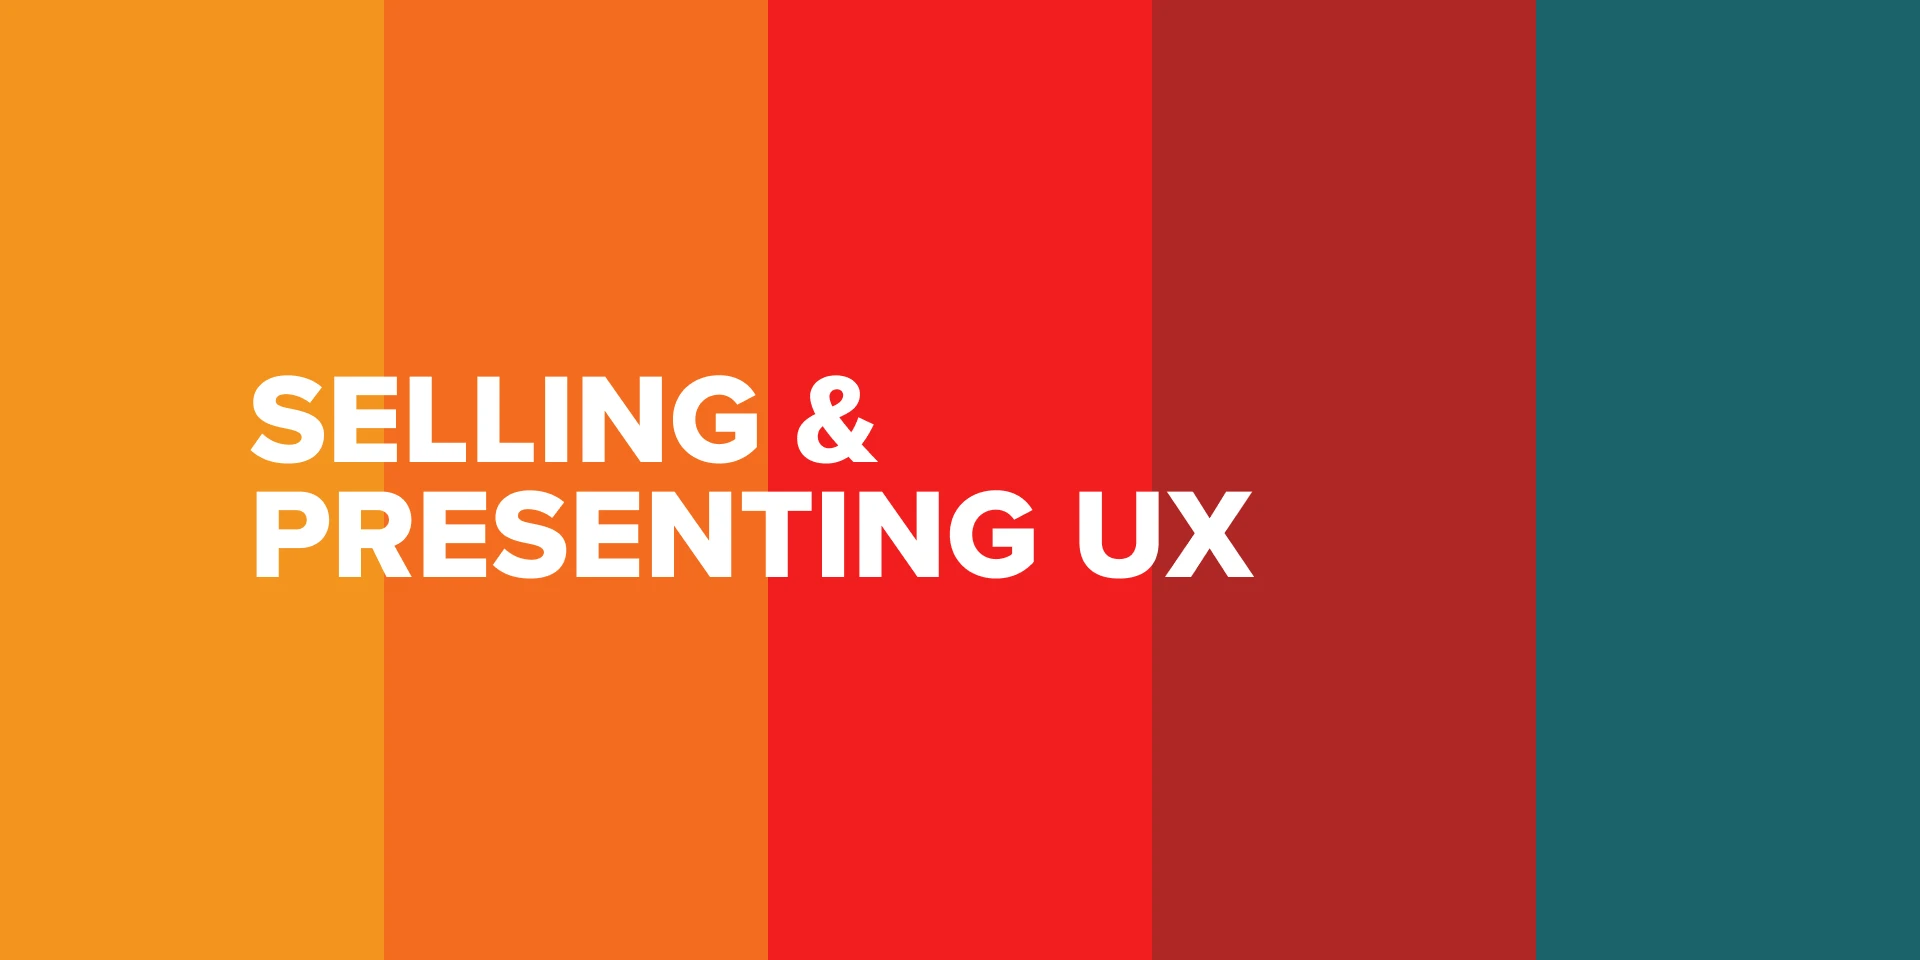 Selling & Presenting UX - Translating UX to Business Values for Figma and Adobe XD